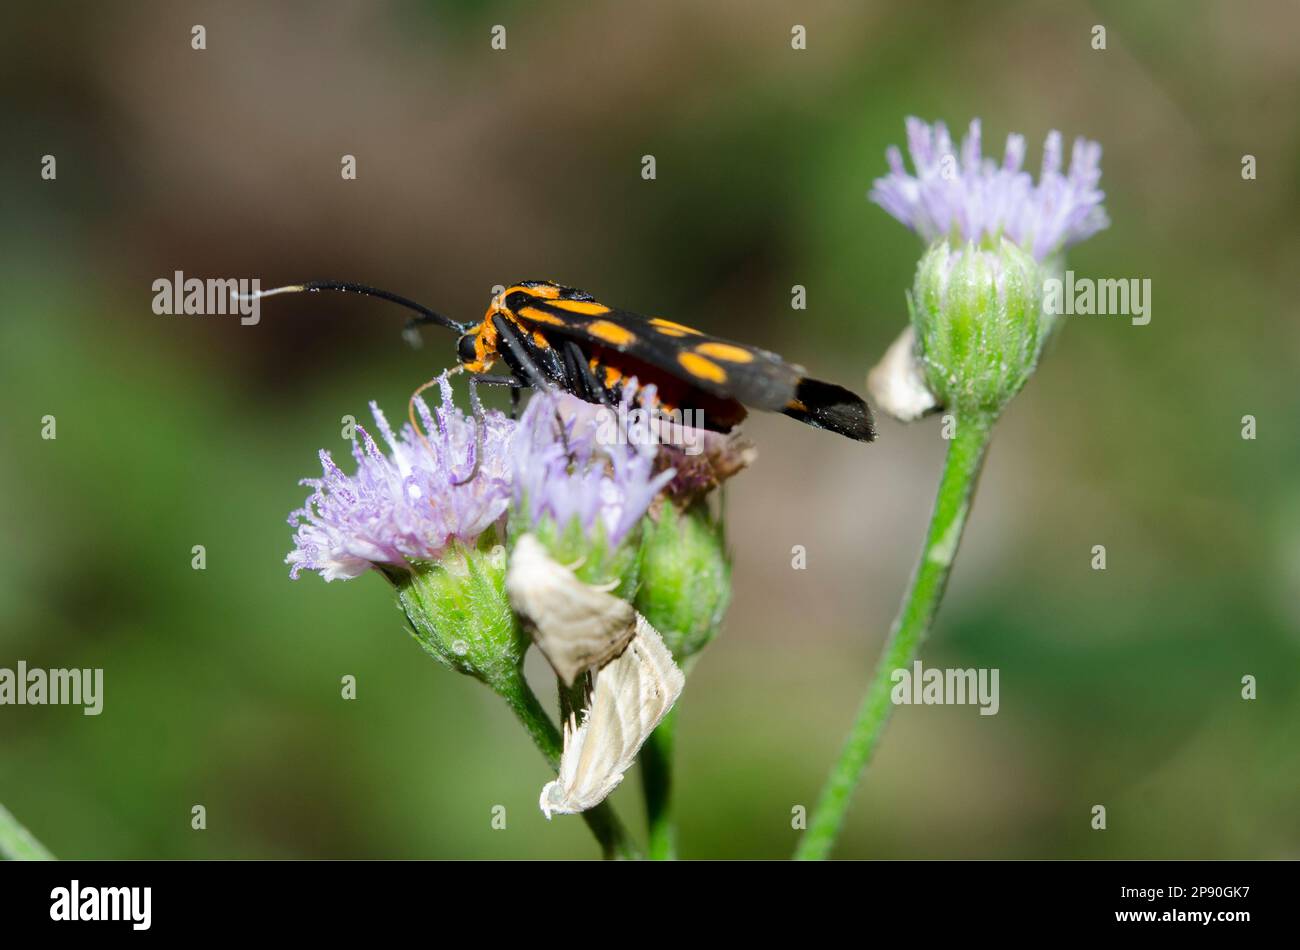 Forester Moth, Artona walkeri, with camouflaged moths, Eublemma sp, on Goatweed flower, Ageratum conyzoides, Klungkung, Bali, Indonesia Stock Photo